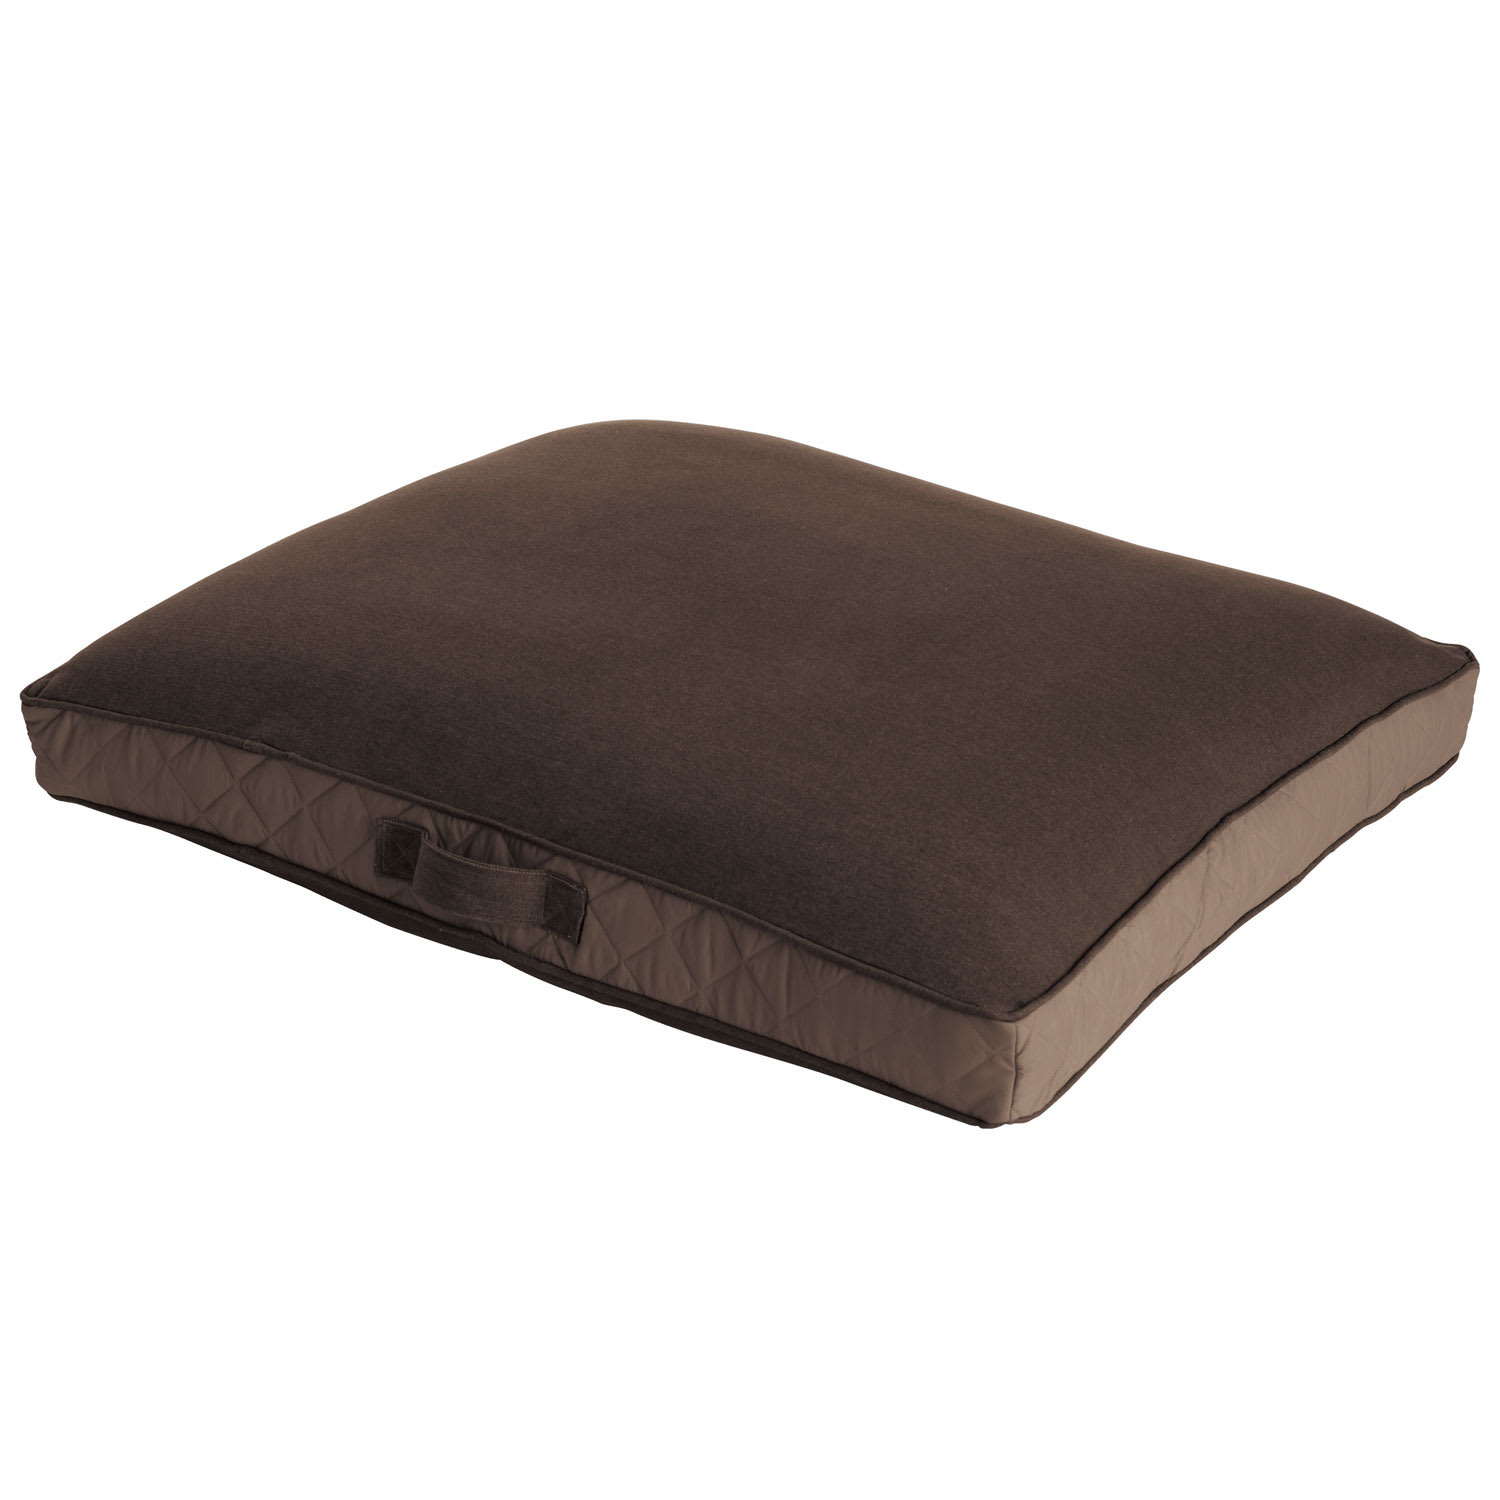 Solid Rectangular Dog Bed Cover - Brown